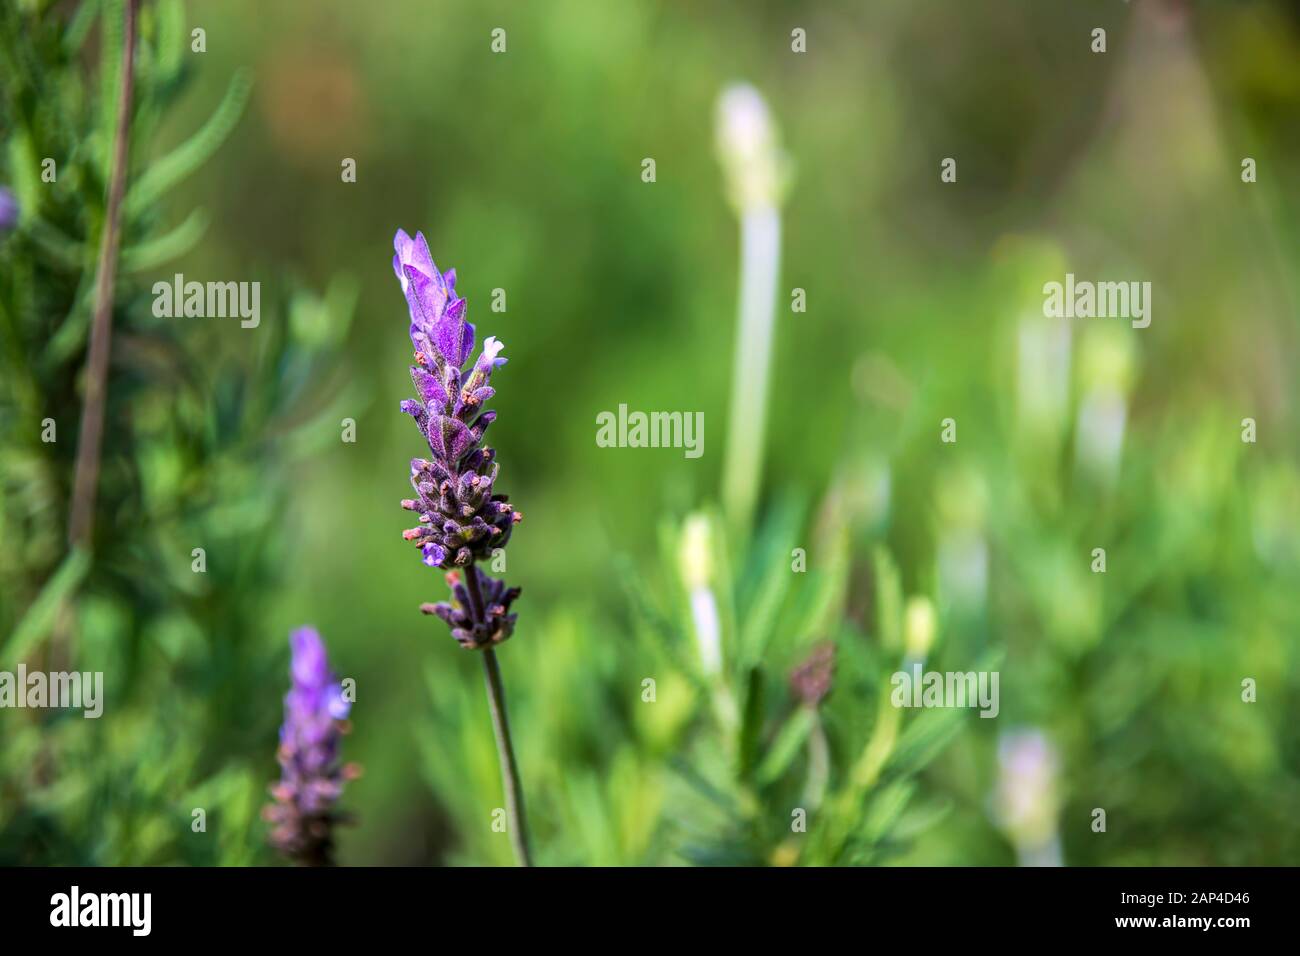 Lavender flower close-up on a green blurred background Stock Photo